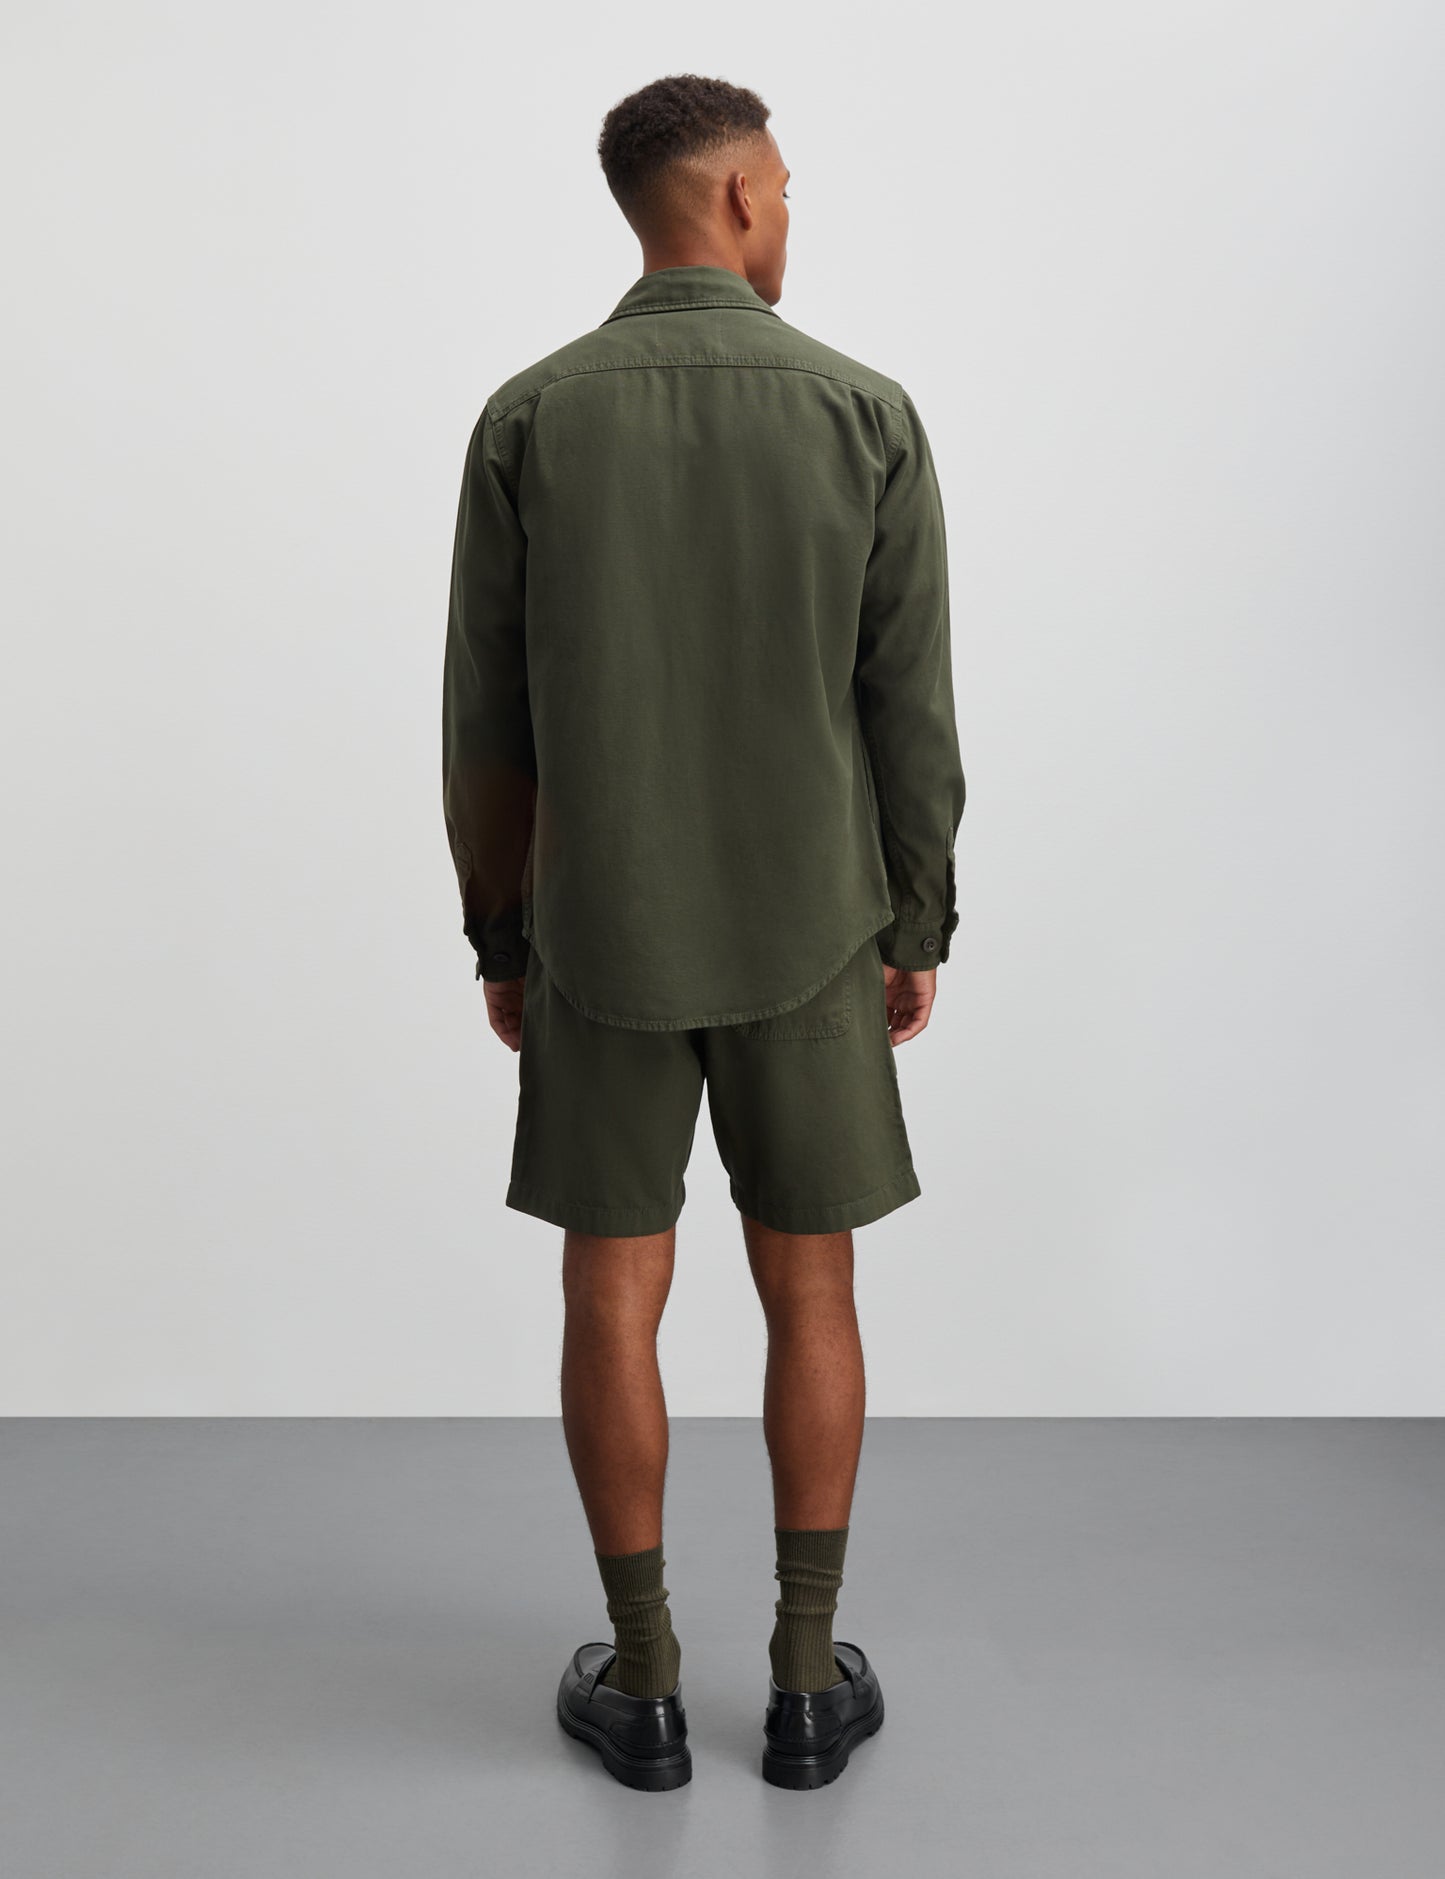 Dyed Canvas Beach Shorts, Olive Night